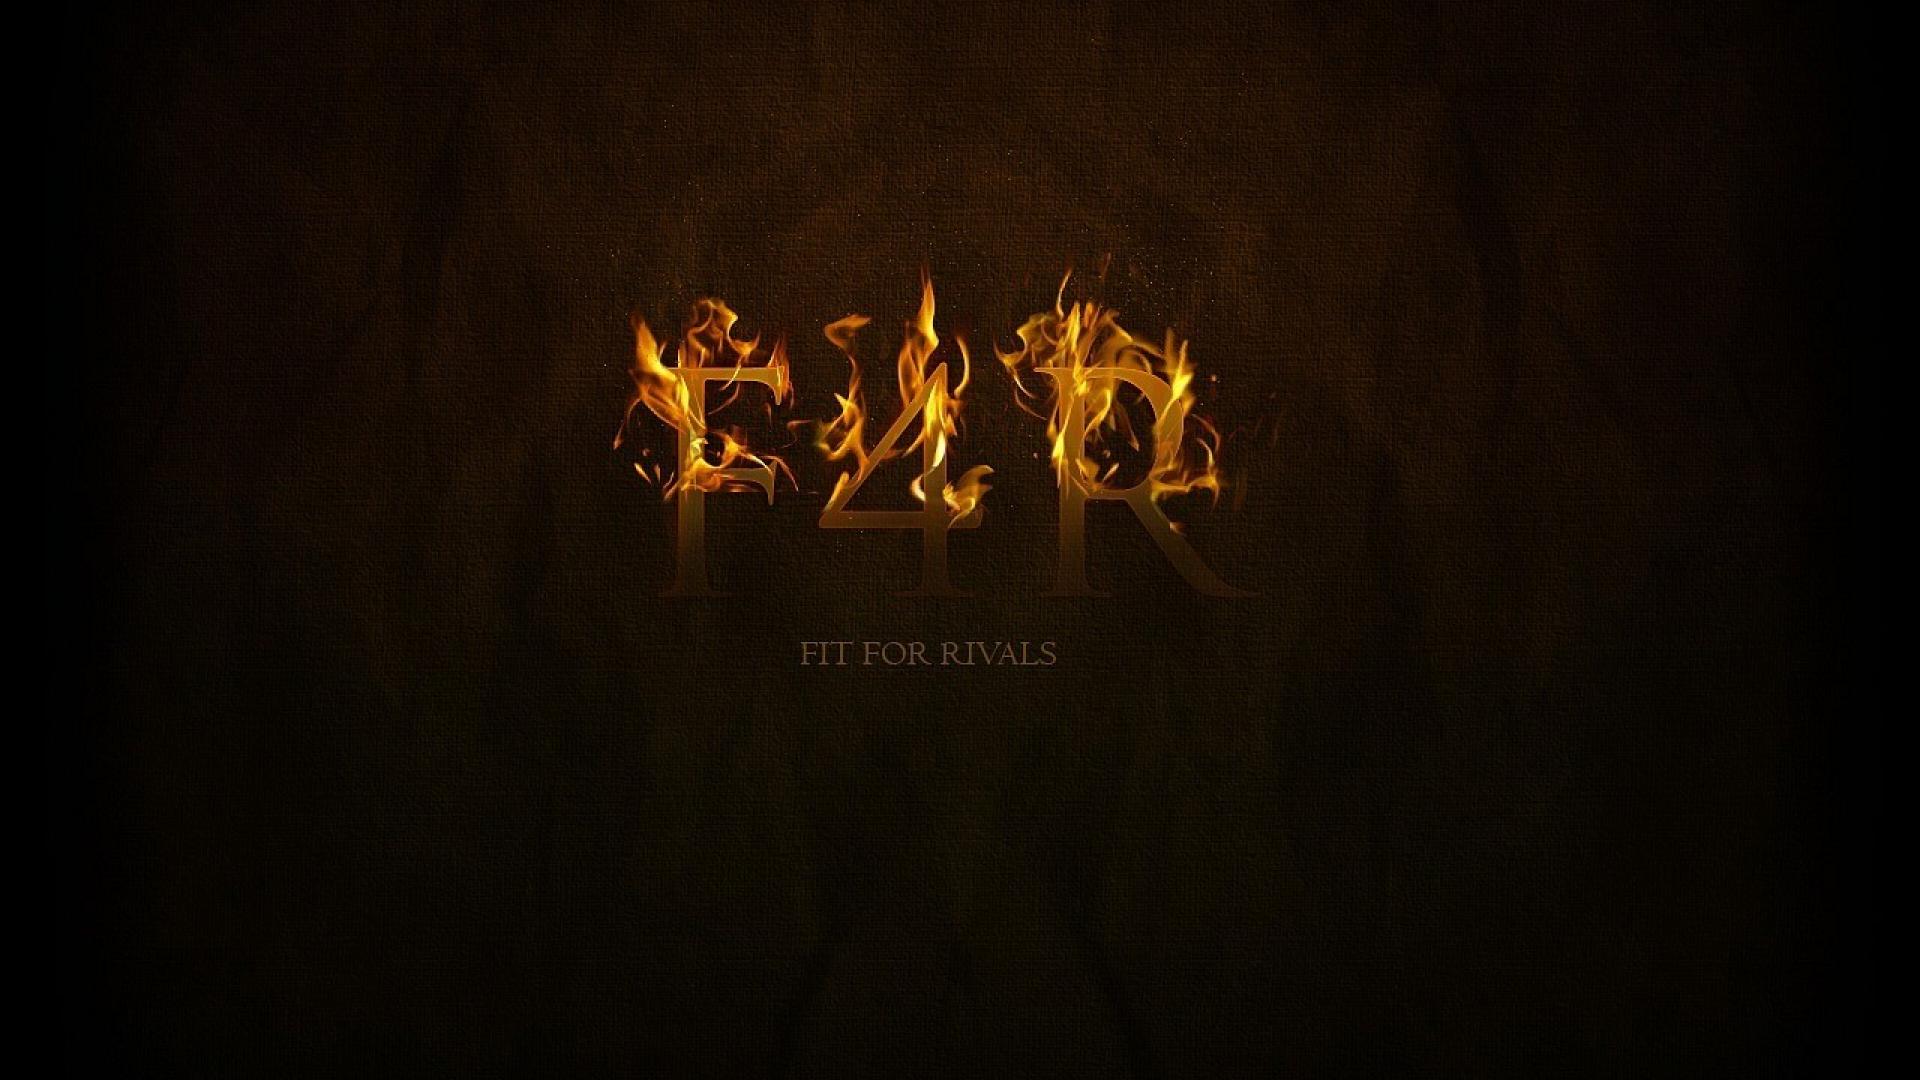 Дарк фир. Darkfire надпись. Fit for Rivals. Fire in the Darkness logo.